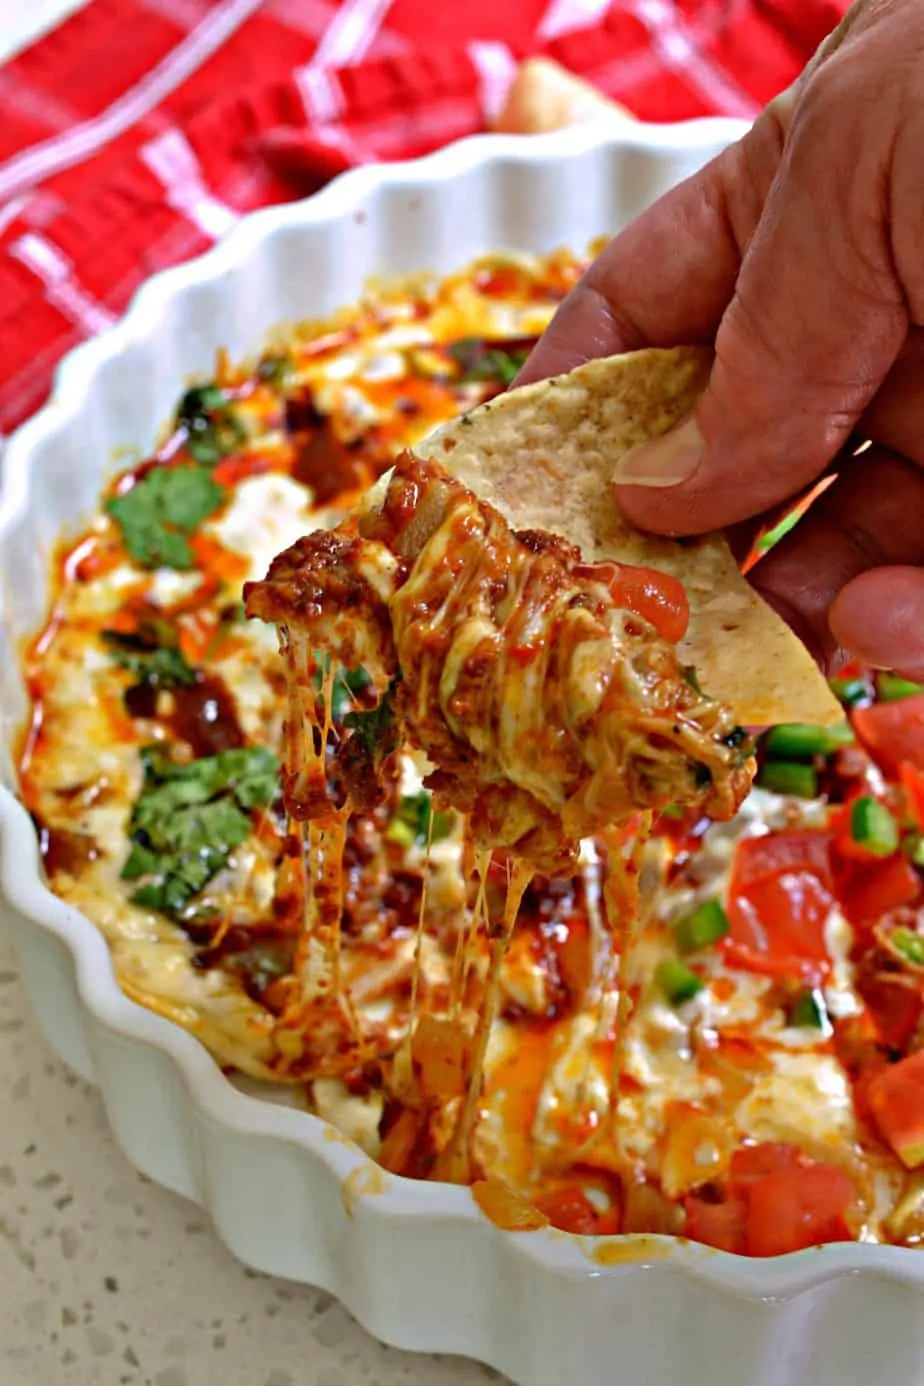 Queso Fundido is a dip with creamy melted cheese, chorizo, spices and toppings served with tortilla chips or tortillas. 